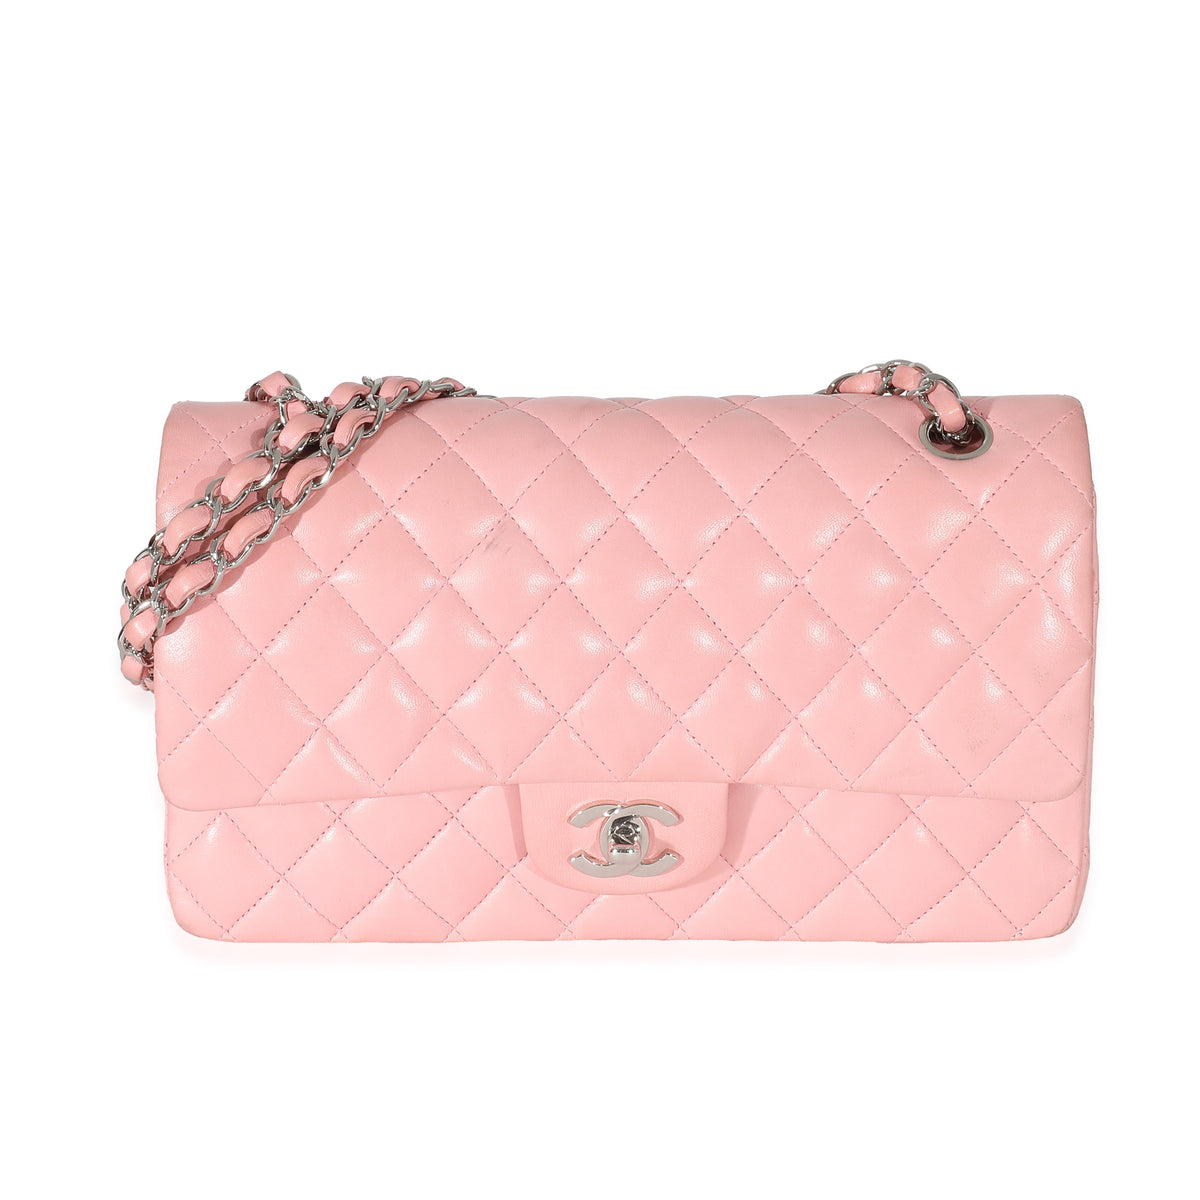 Chanel Pink Quilted Lambskin Small Classic Double Flap Bag, myGemma, SG